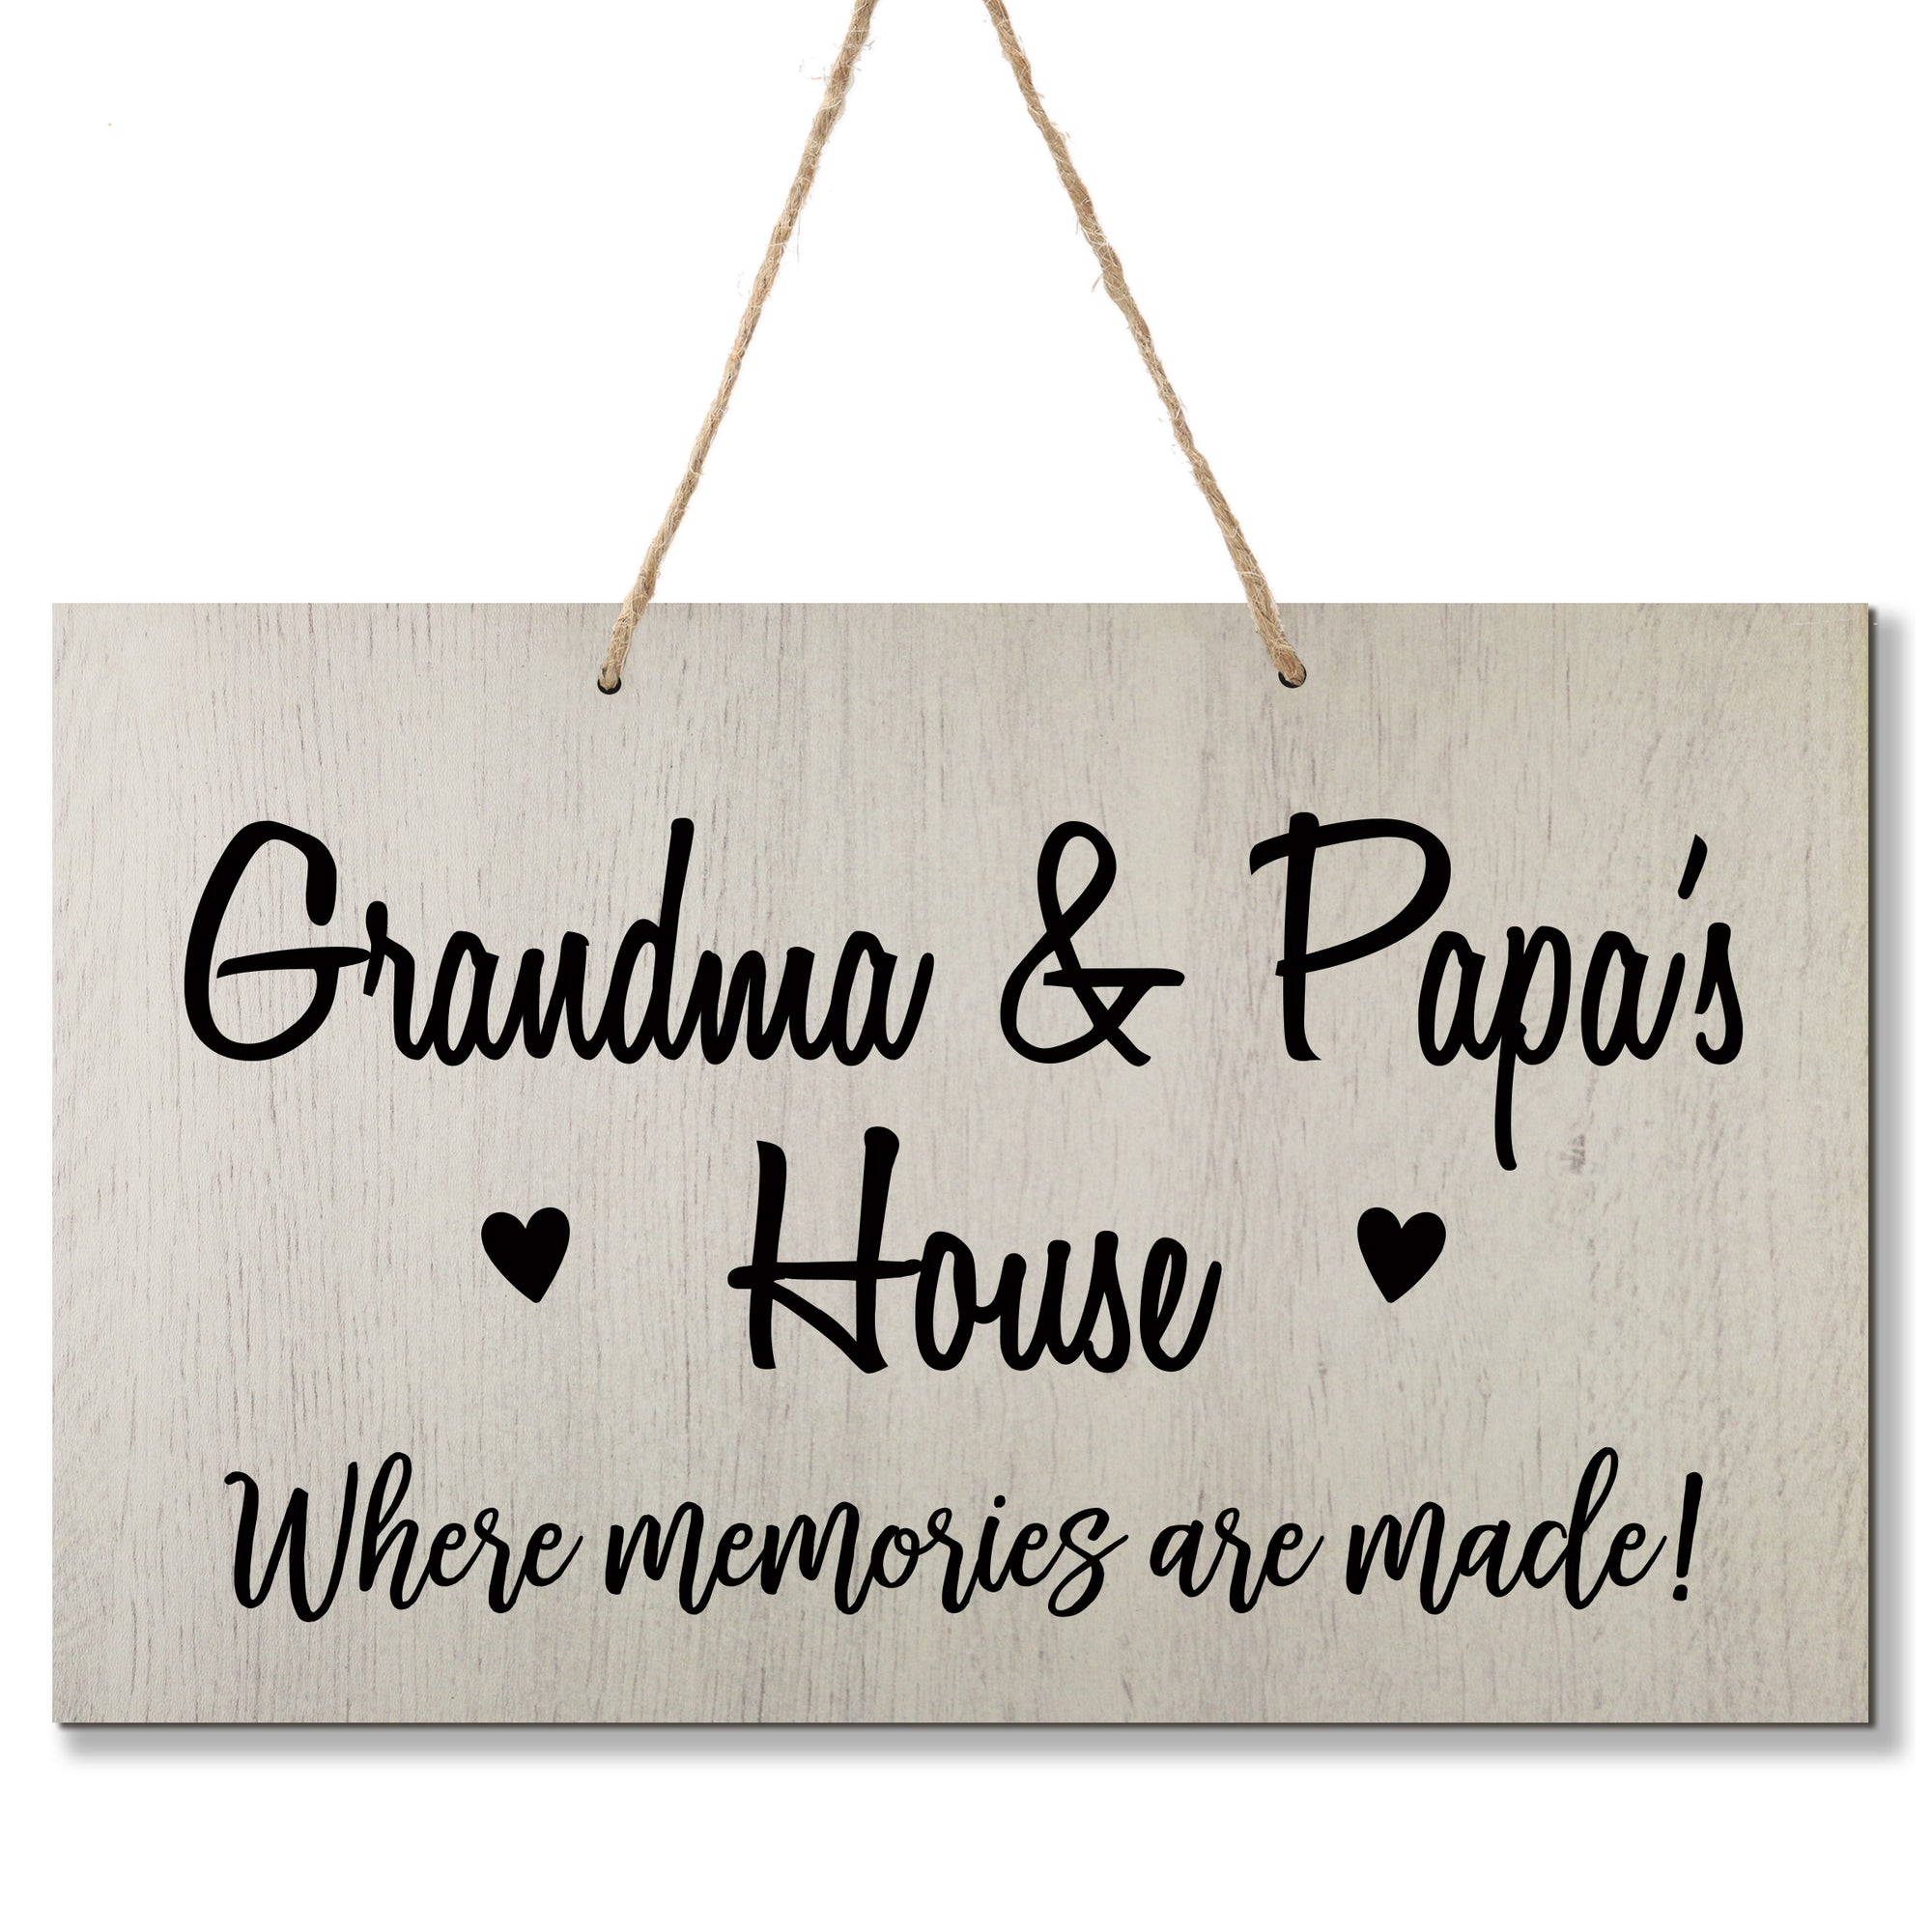 Personalized Grandparent Wall Hanging Sign Gift - Memories Are Made Grandma and Papa White